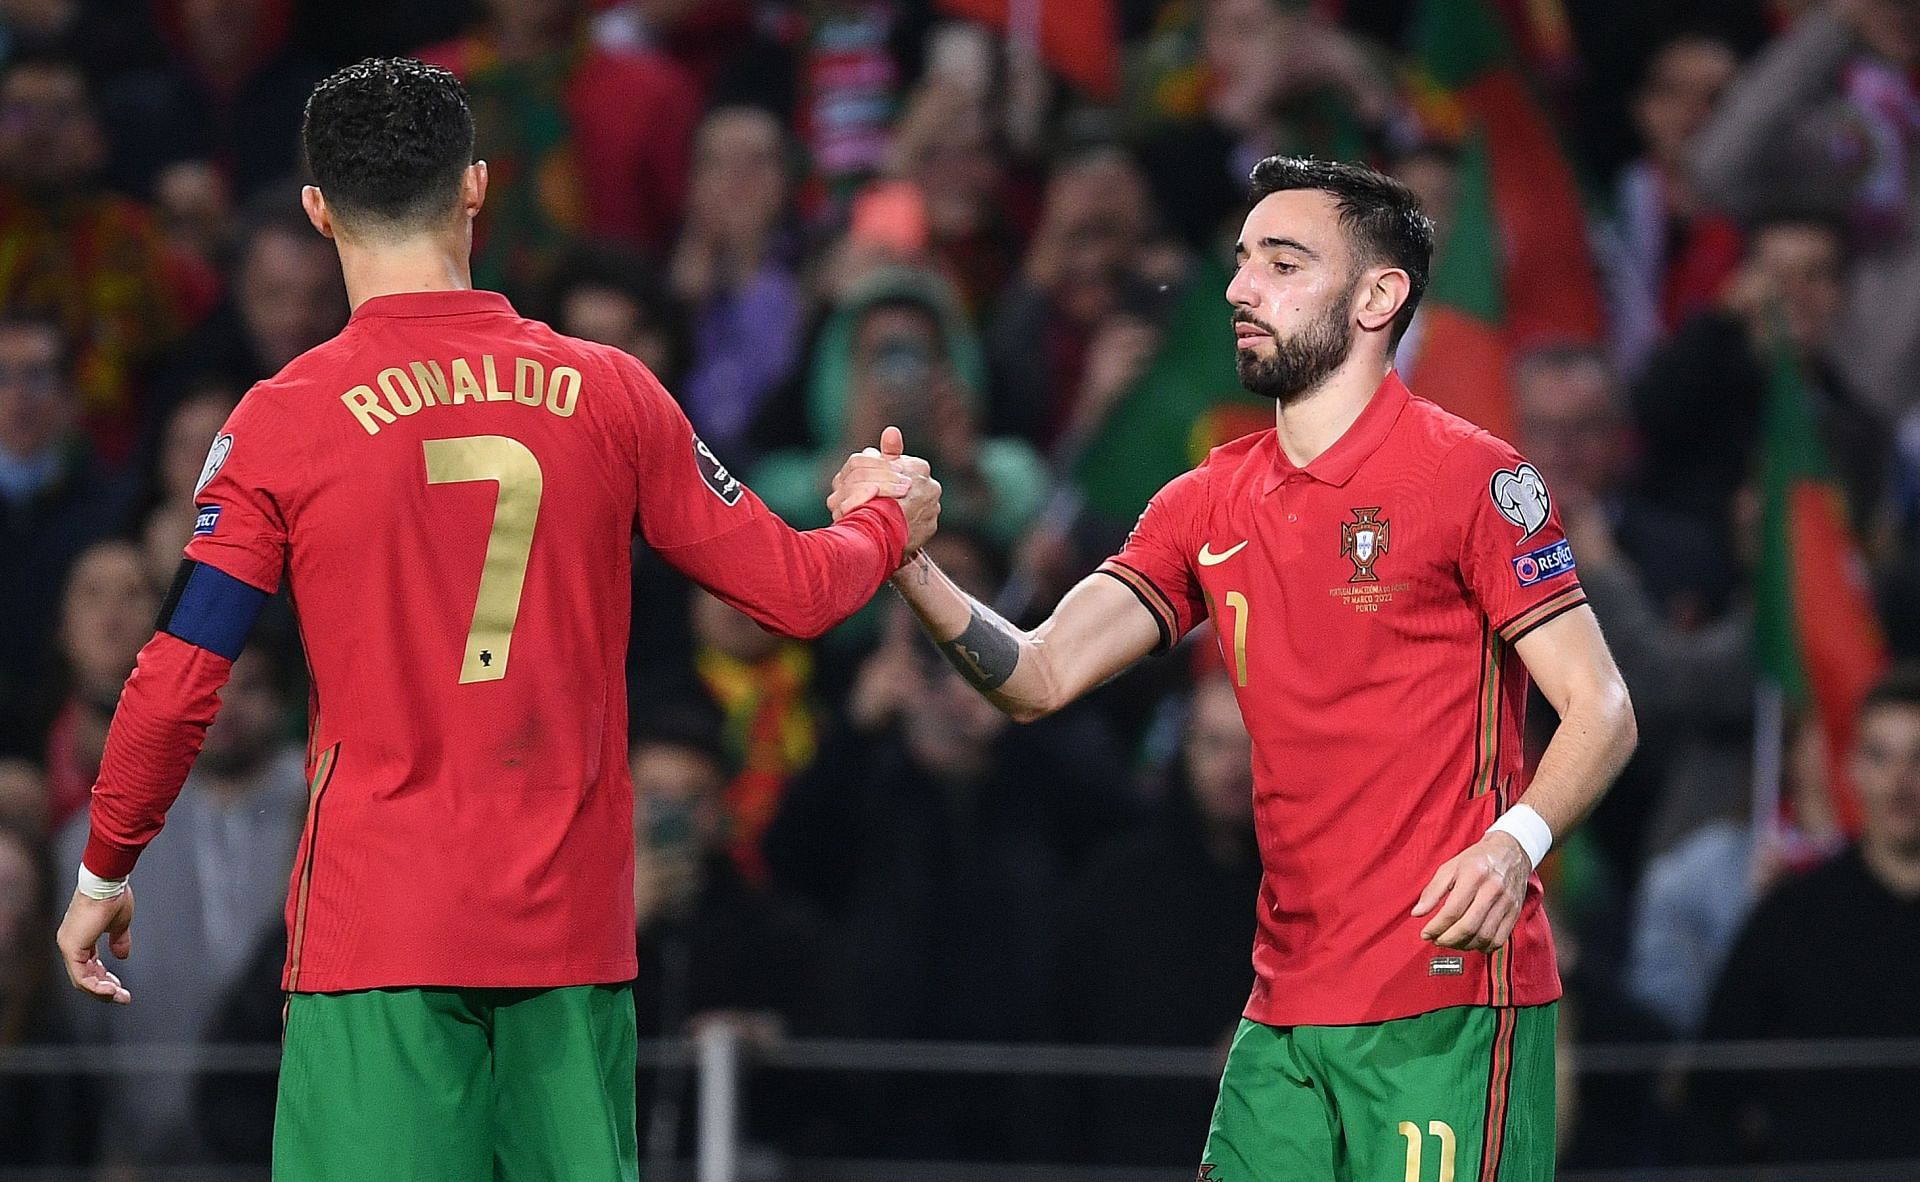 Bruno Fernandes (right) celebrates his opening goal with Cristiano Ronaldo.